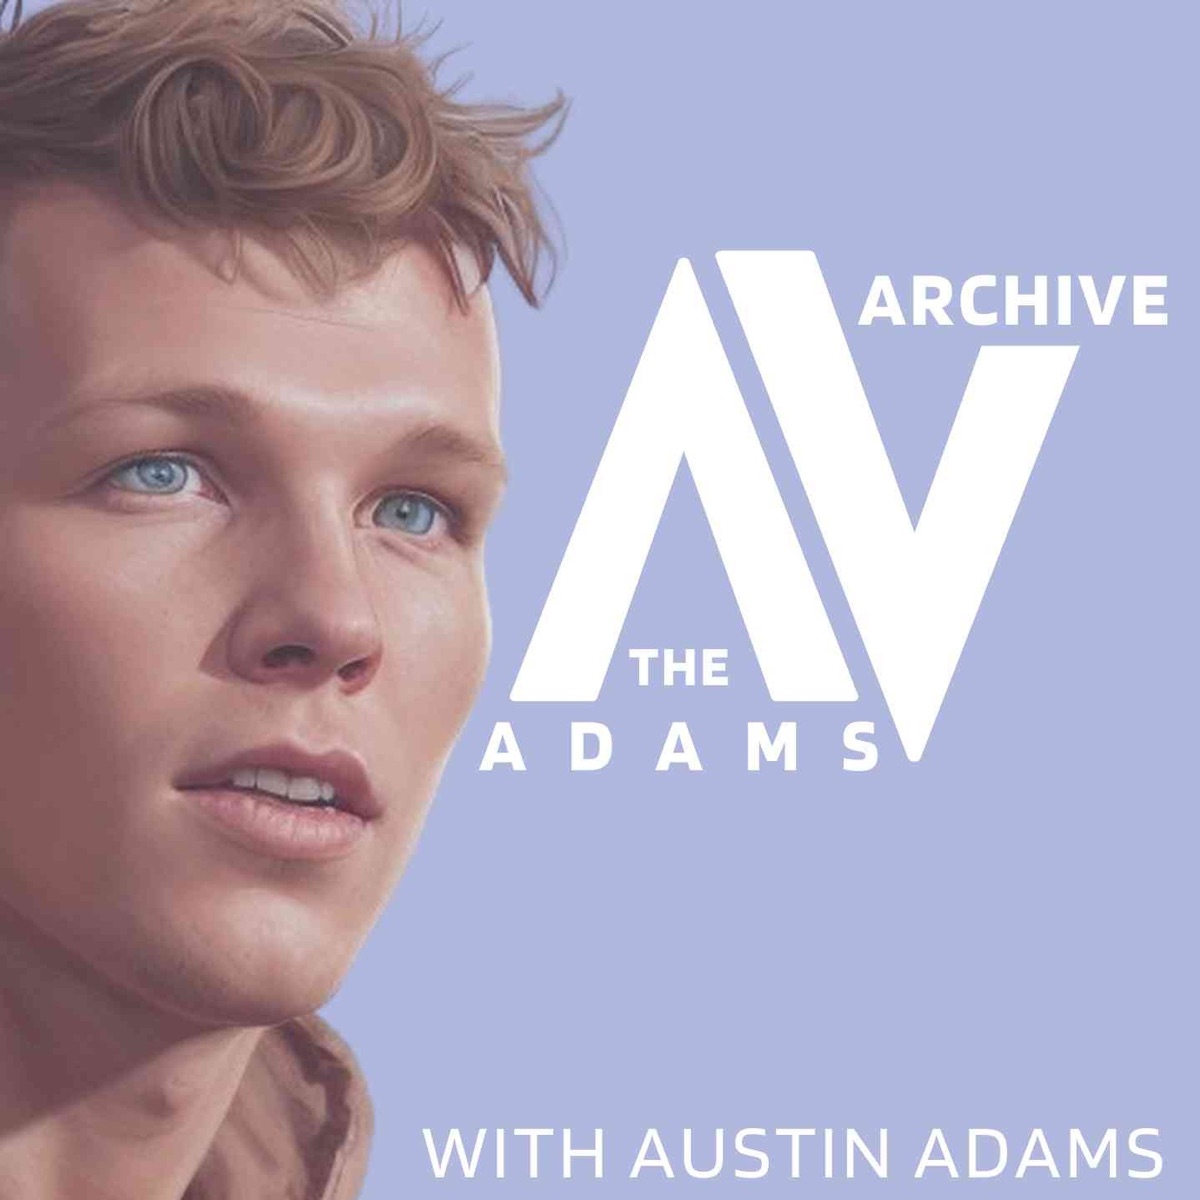 The Adams Archive – Podcast